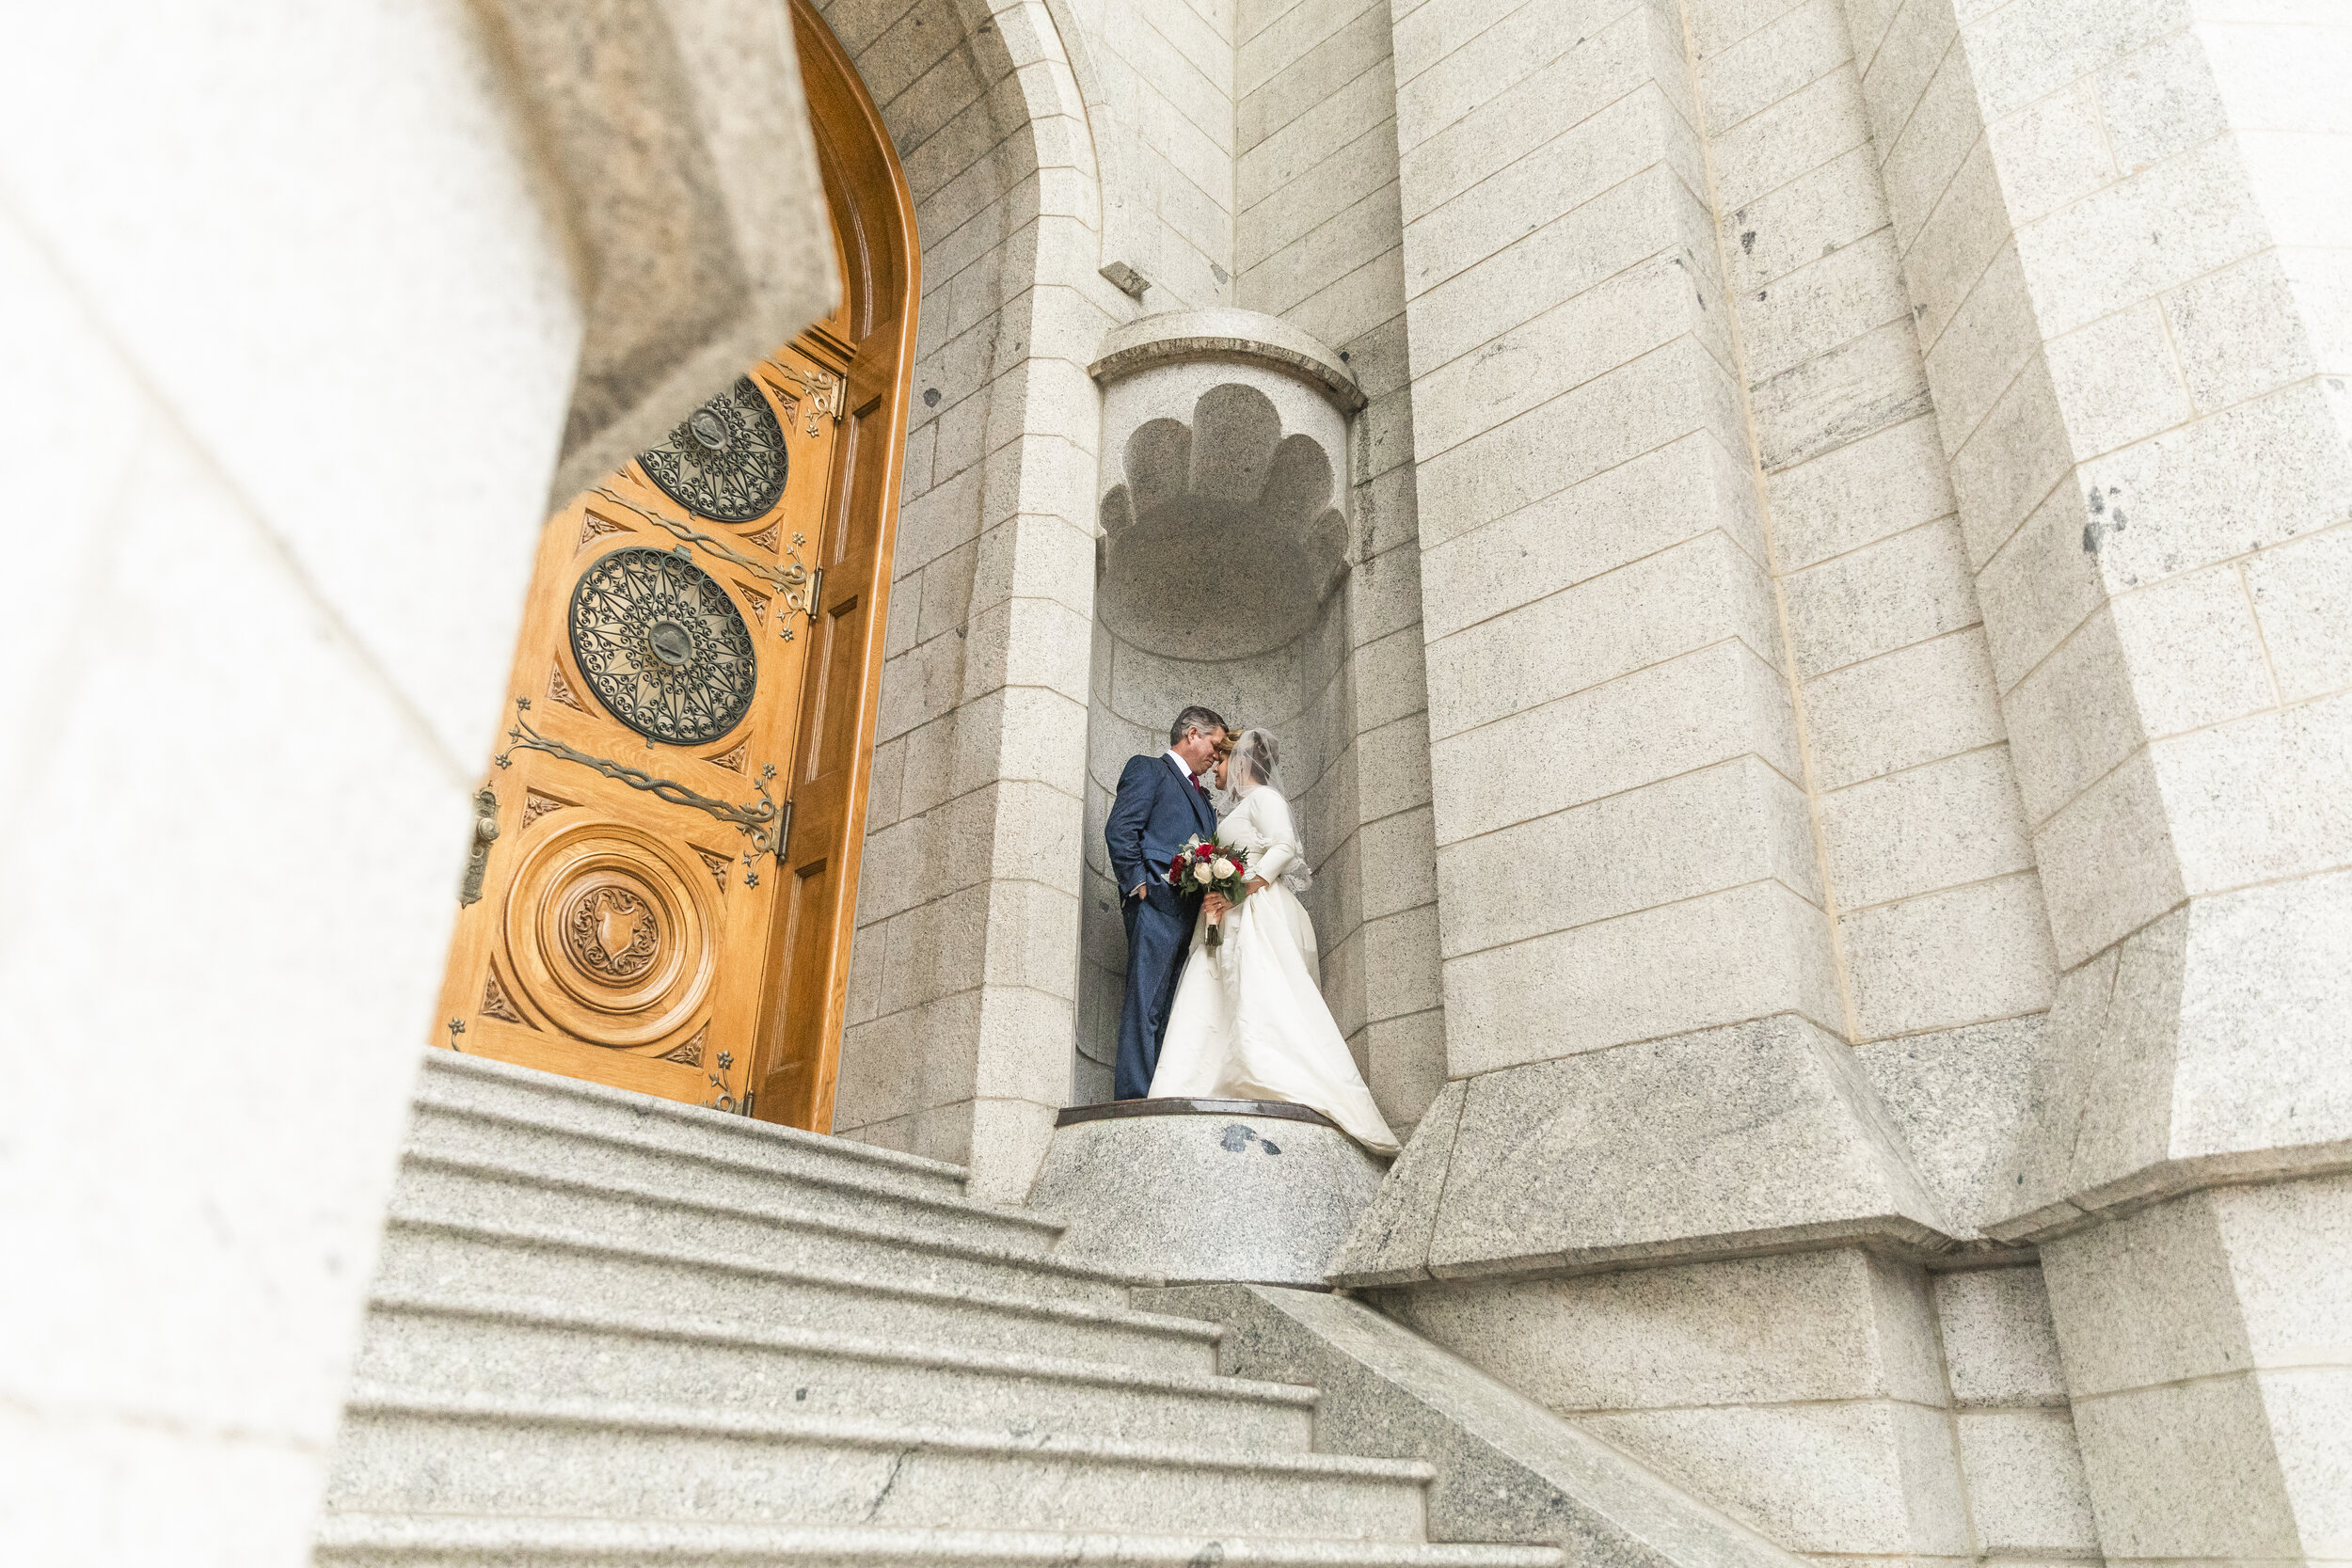  salt lake city lds temple stairs tall wooden doors pedestal wedding photos bride and groom hugging kissing happy just married temple square rainy wedding day professional utah valley wedding photography #saltlakeldstemple #saltlakecityutah #templesq